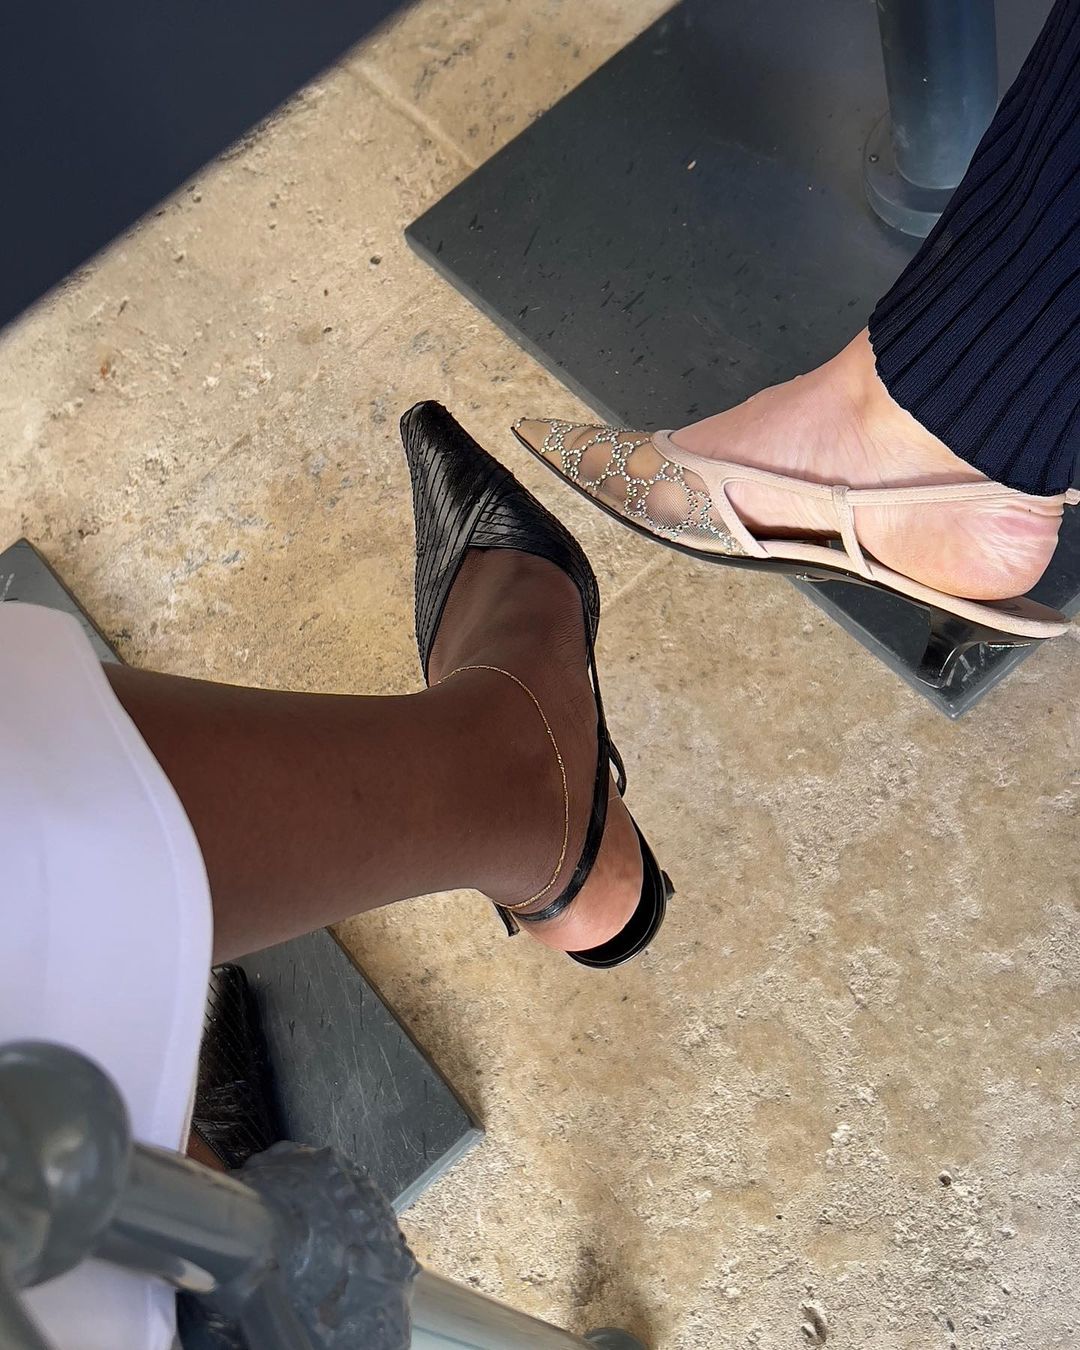 French Summer Shoe Trends: The styles people in Paris are currently wearing, including slingbacks